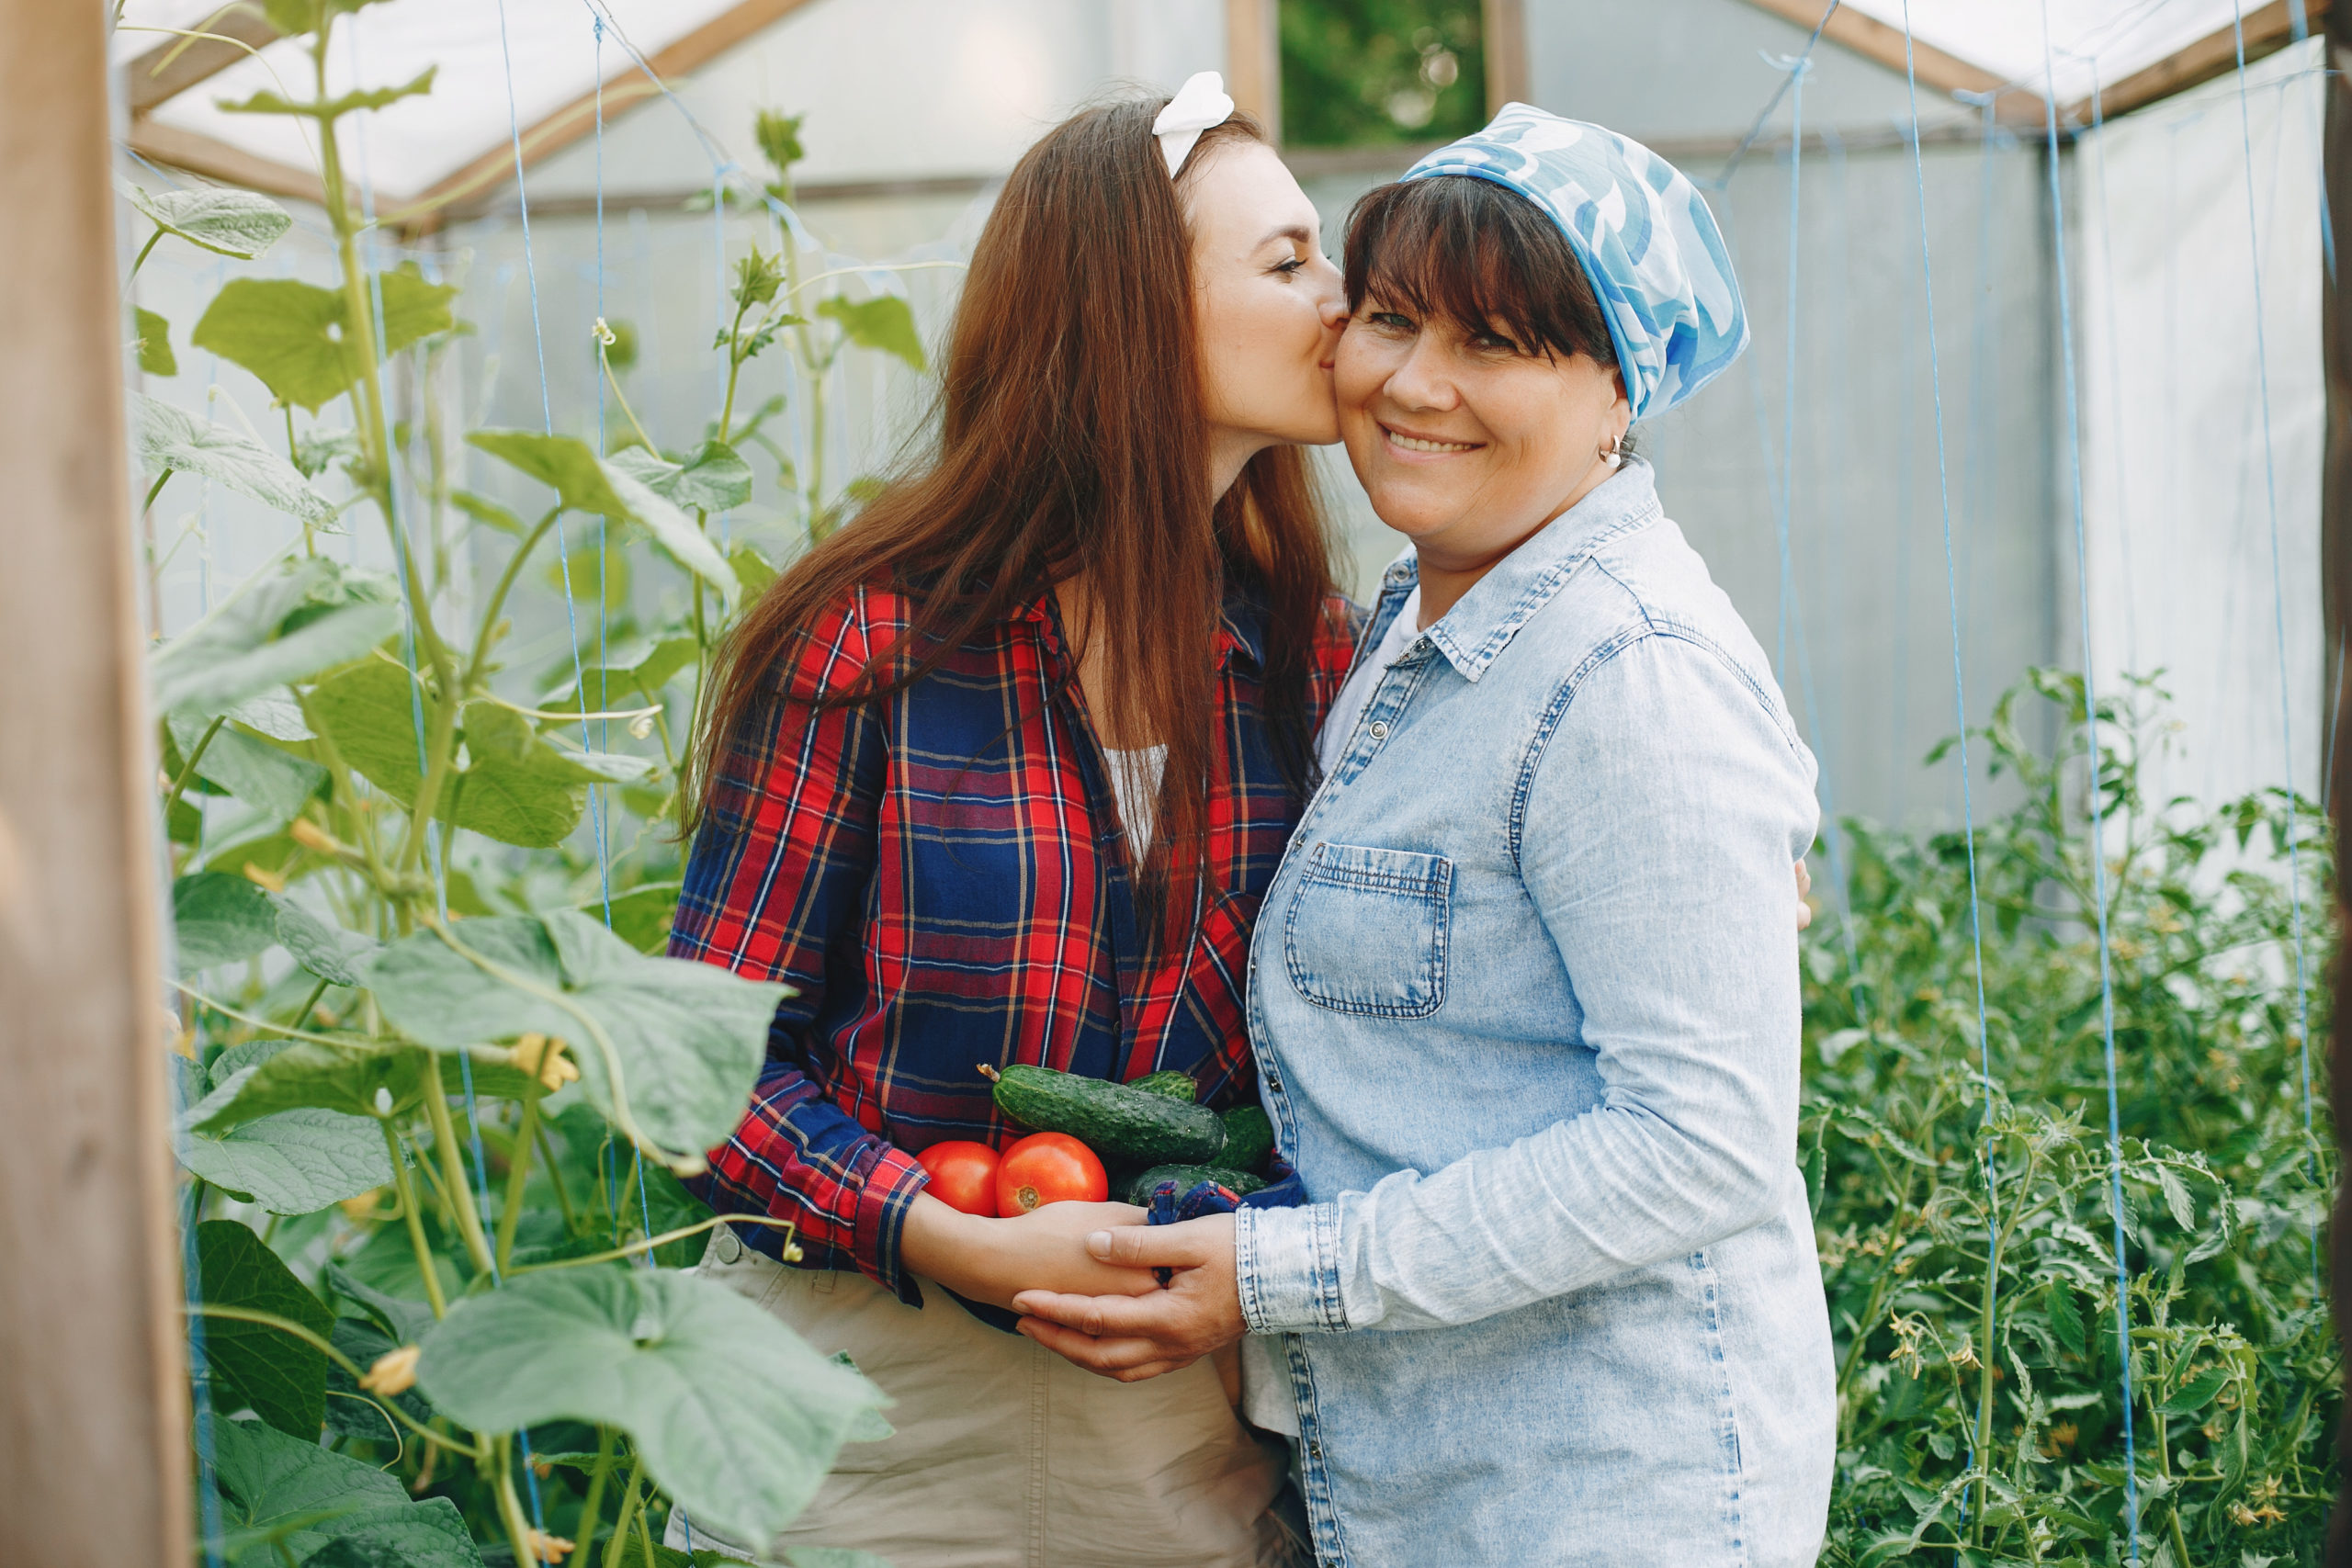 Adult daughter kisses her smiling mother on the cheek as they harvest tomatoes and cucumbers in their greenhouse garden.